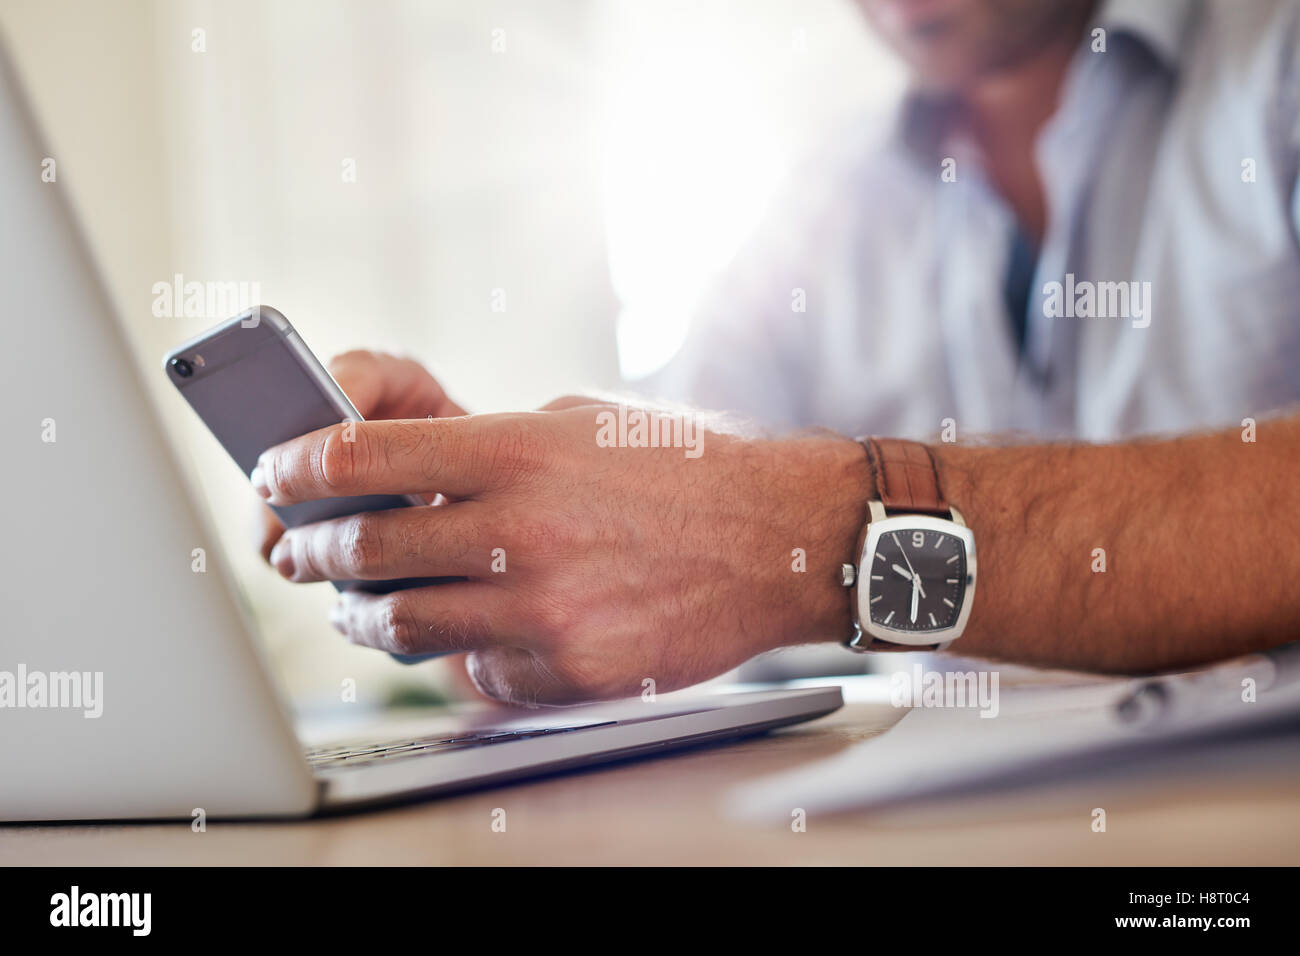 Shot of a man's hands using smart phone. Business man hands busy using mobile phone, focus on the hand and cellphone. Stock Photo